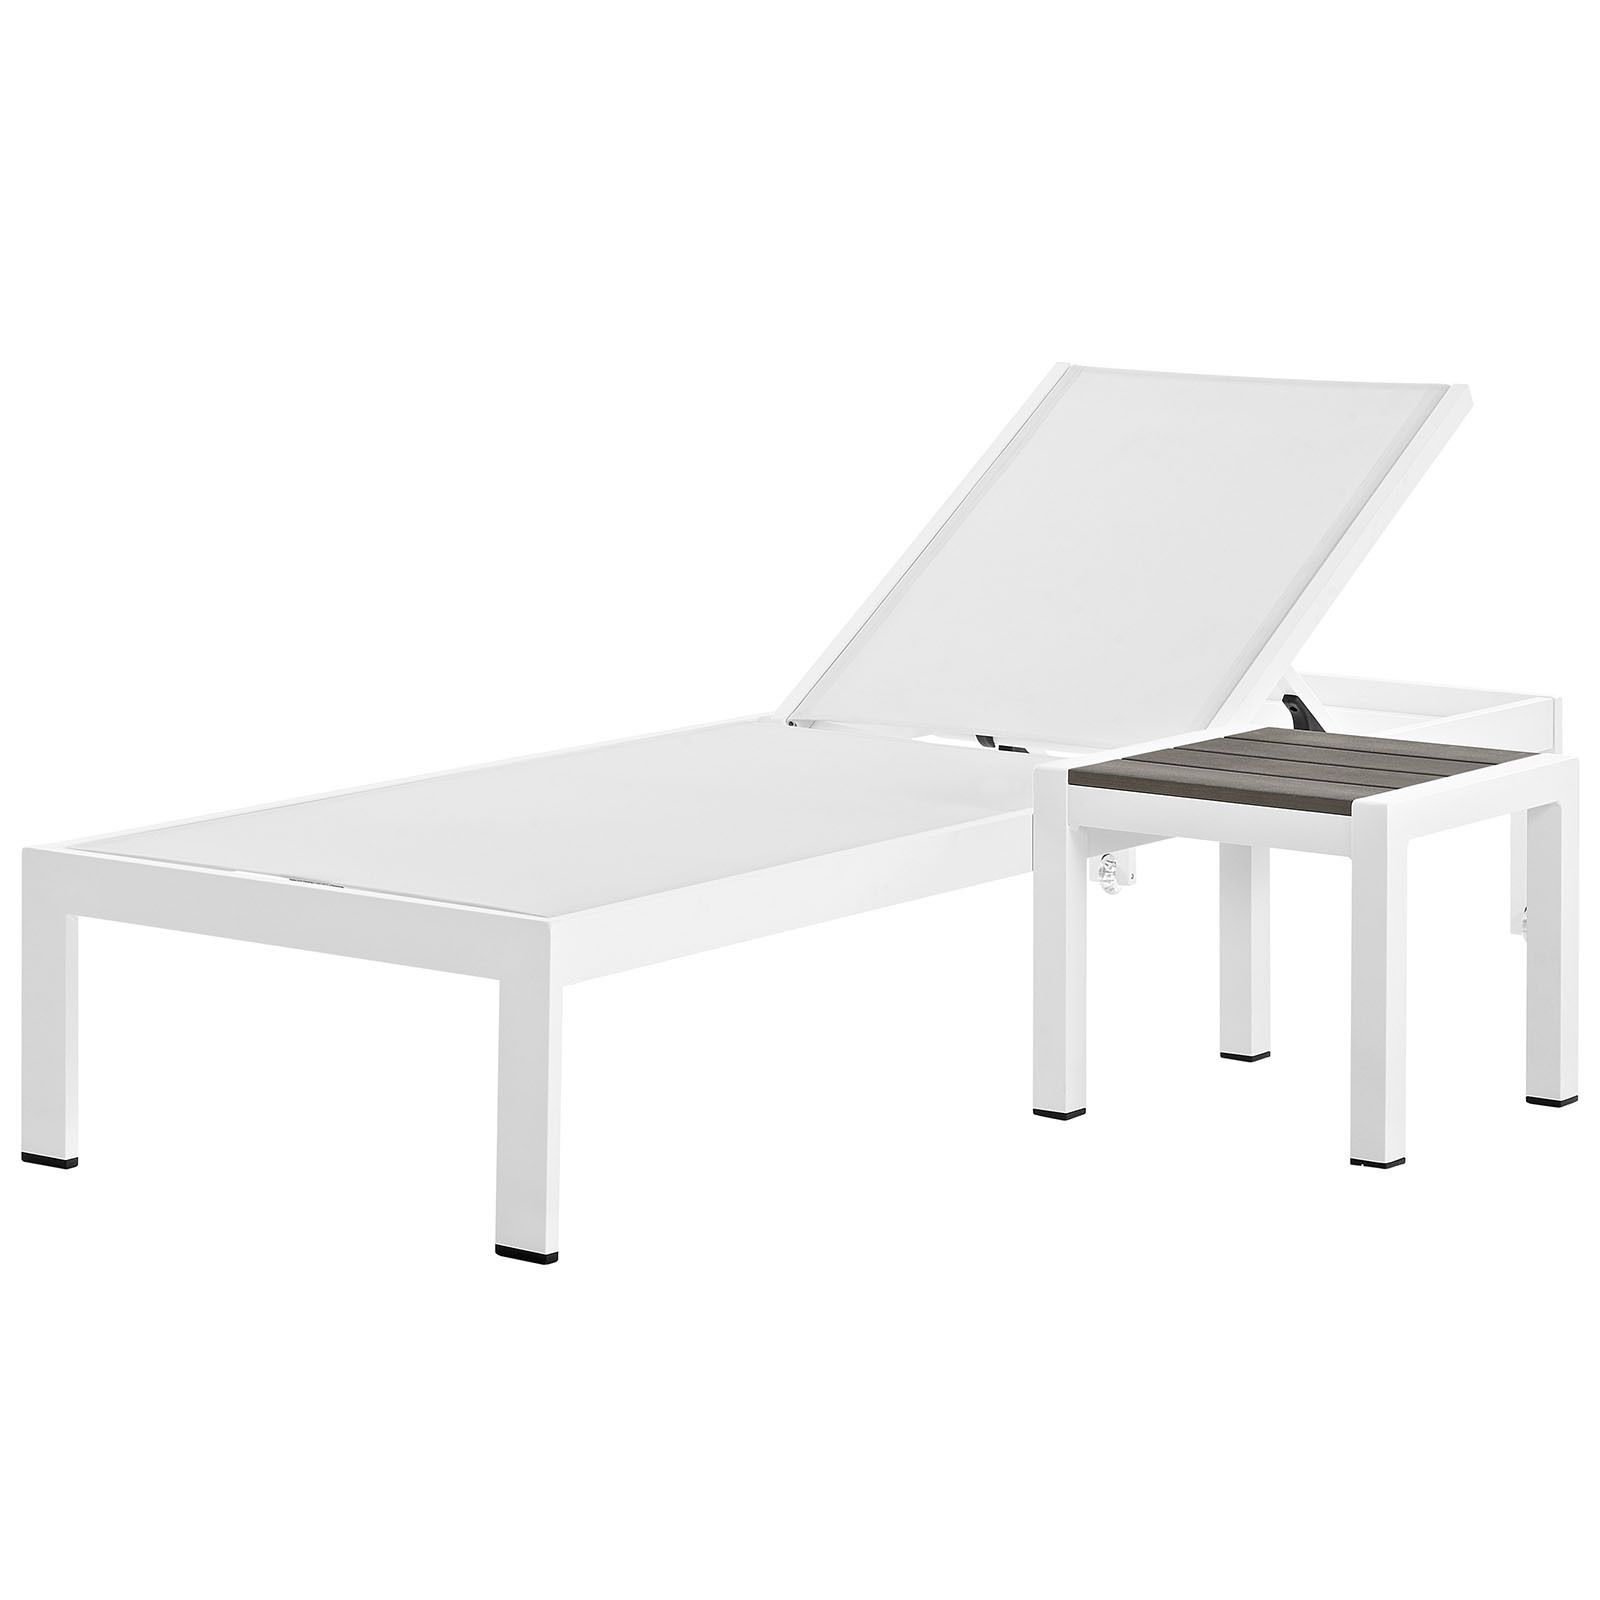 Well Known Shore Aluminum Outdoor Chaises Intended For Shore Aluminum Outdoor Chaise Set Of  (View 8 of 25)